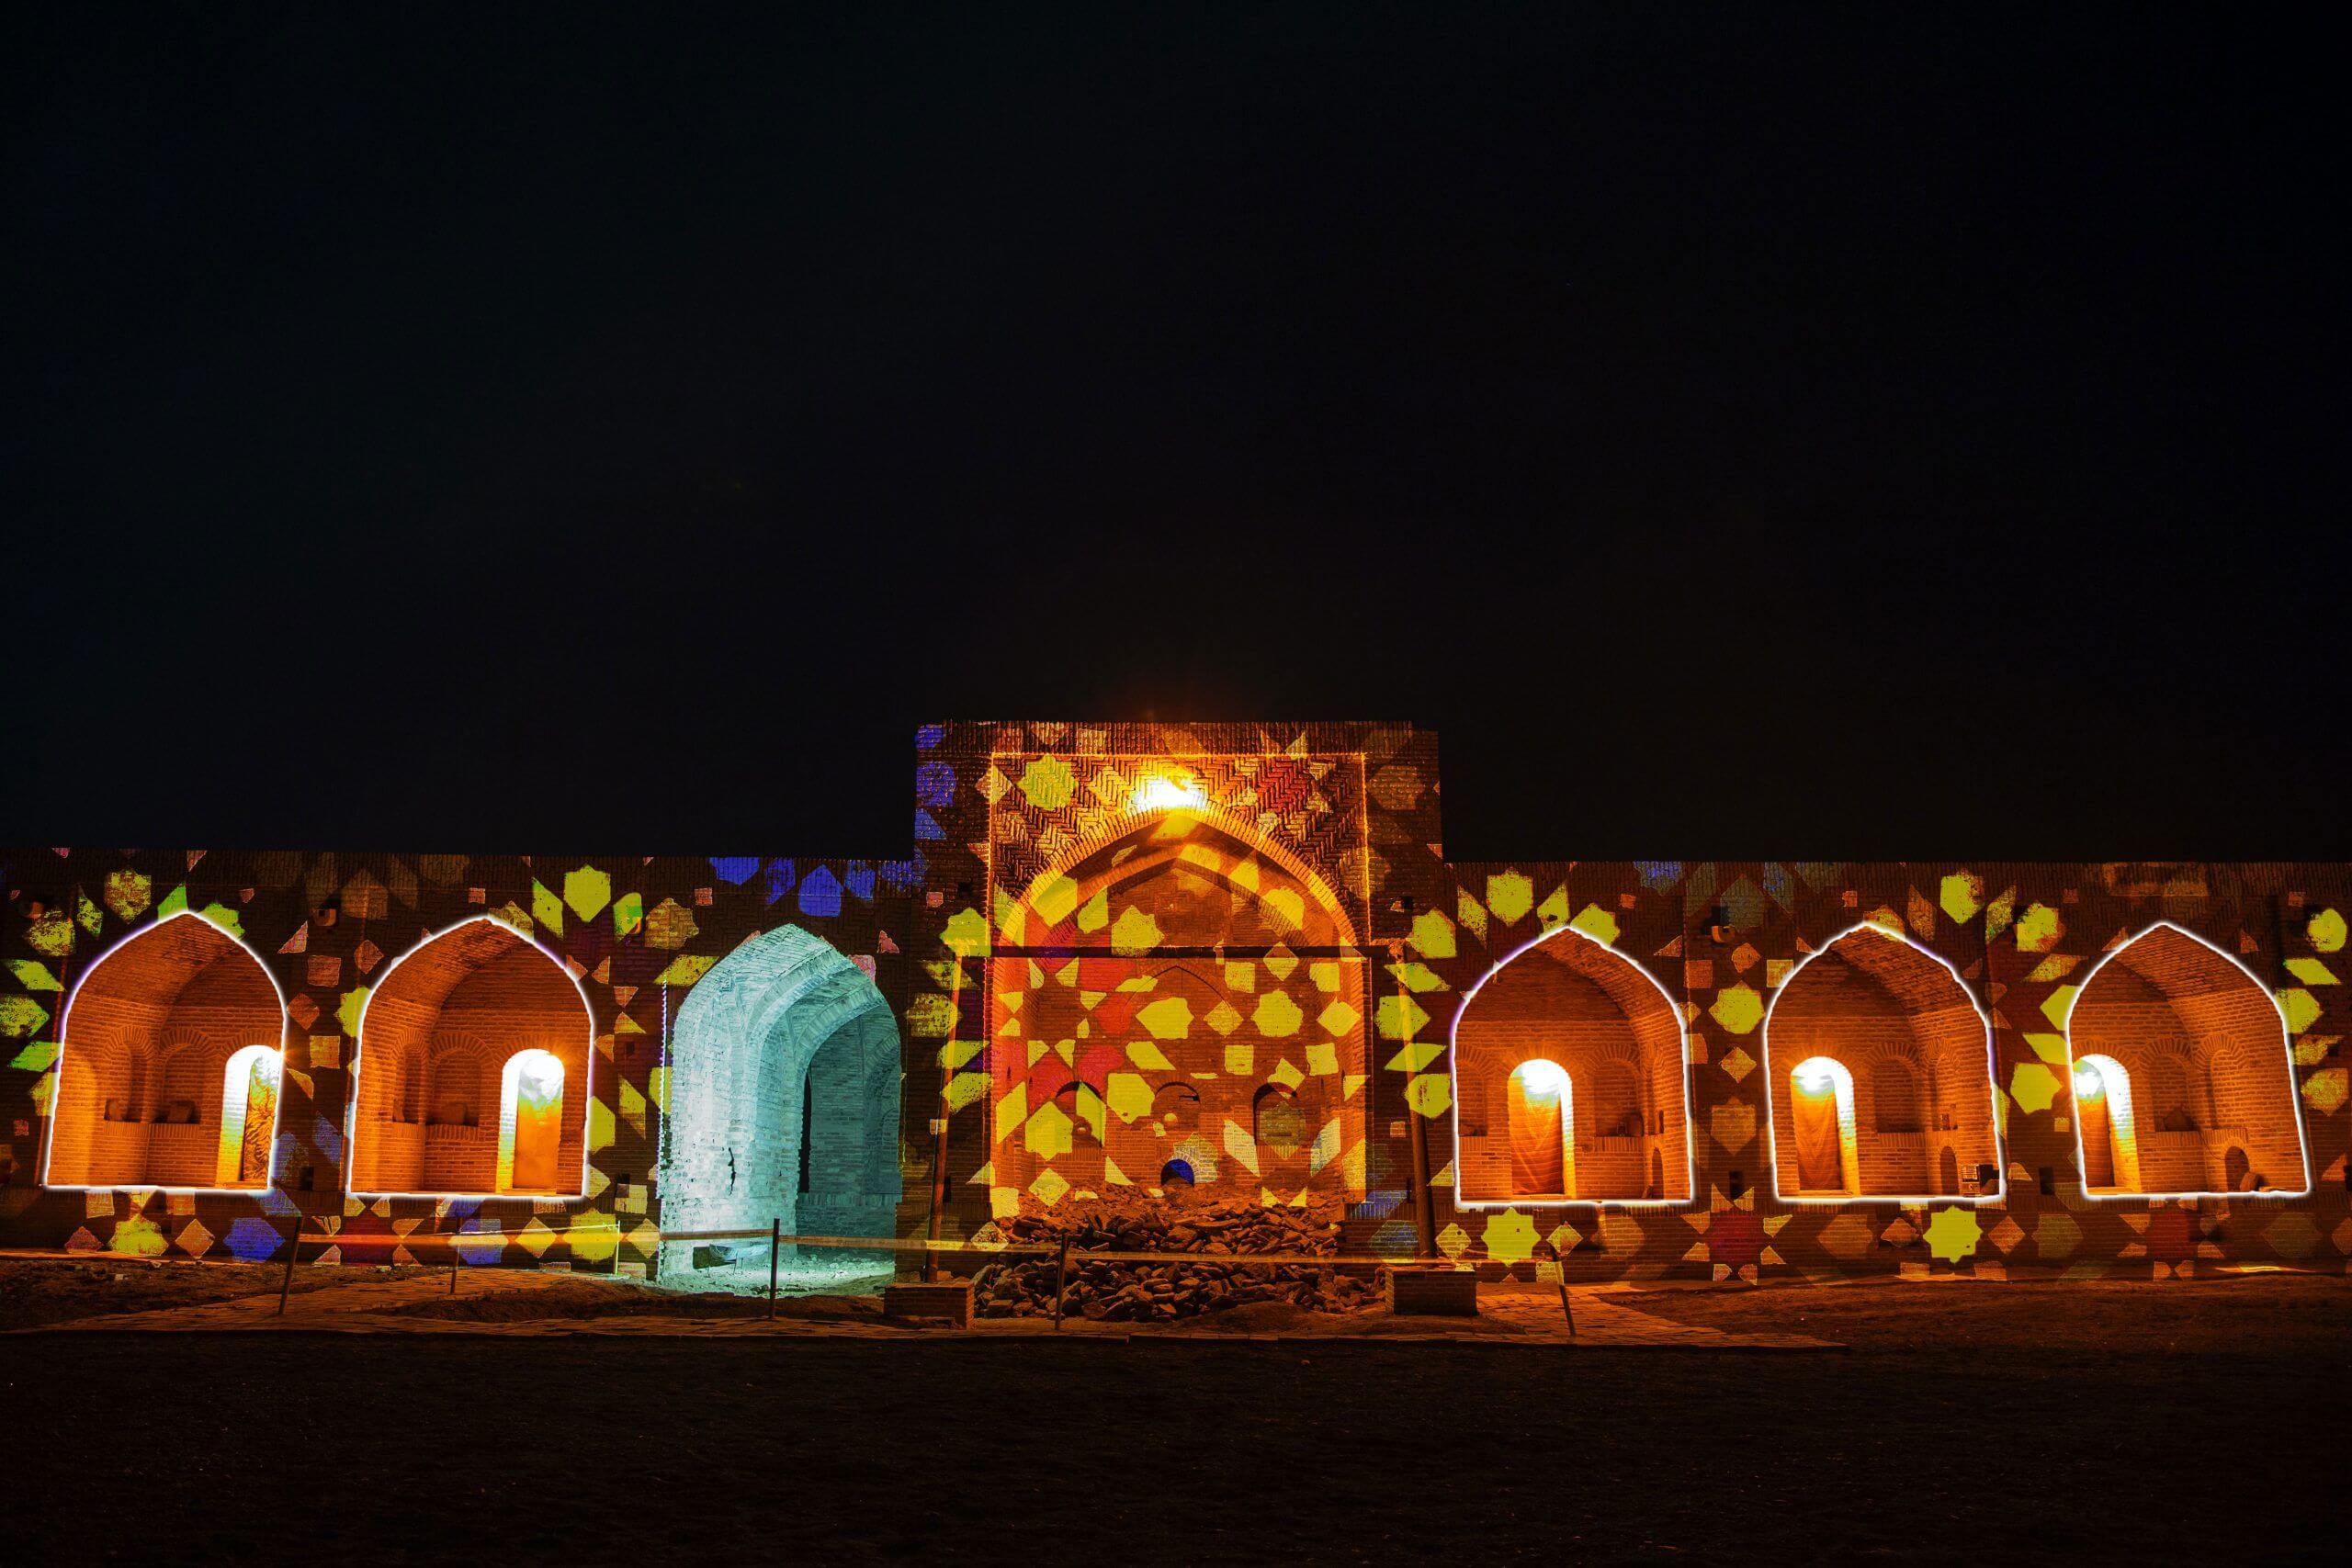 Europe Évènement - Photo of a caravanserai with mosaic shapes projected onto it and the outlines of the openings traced.